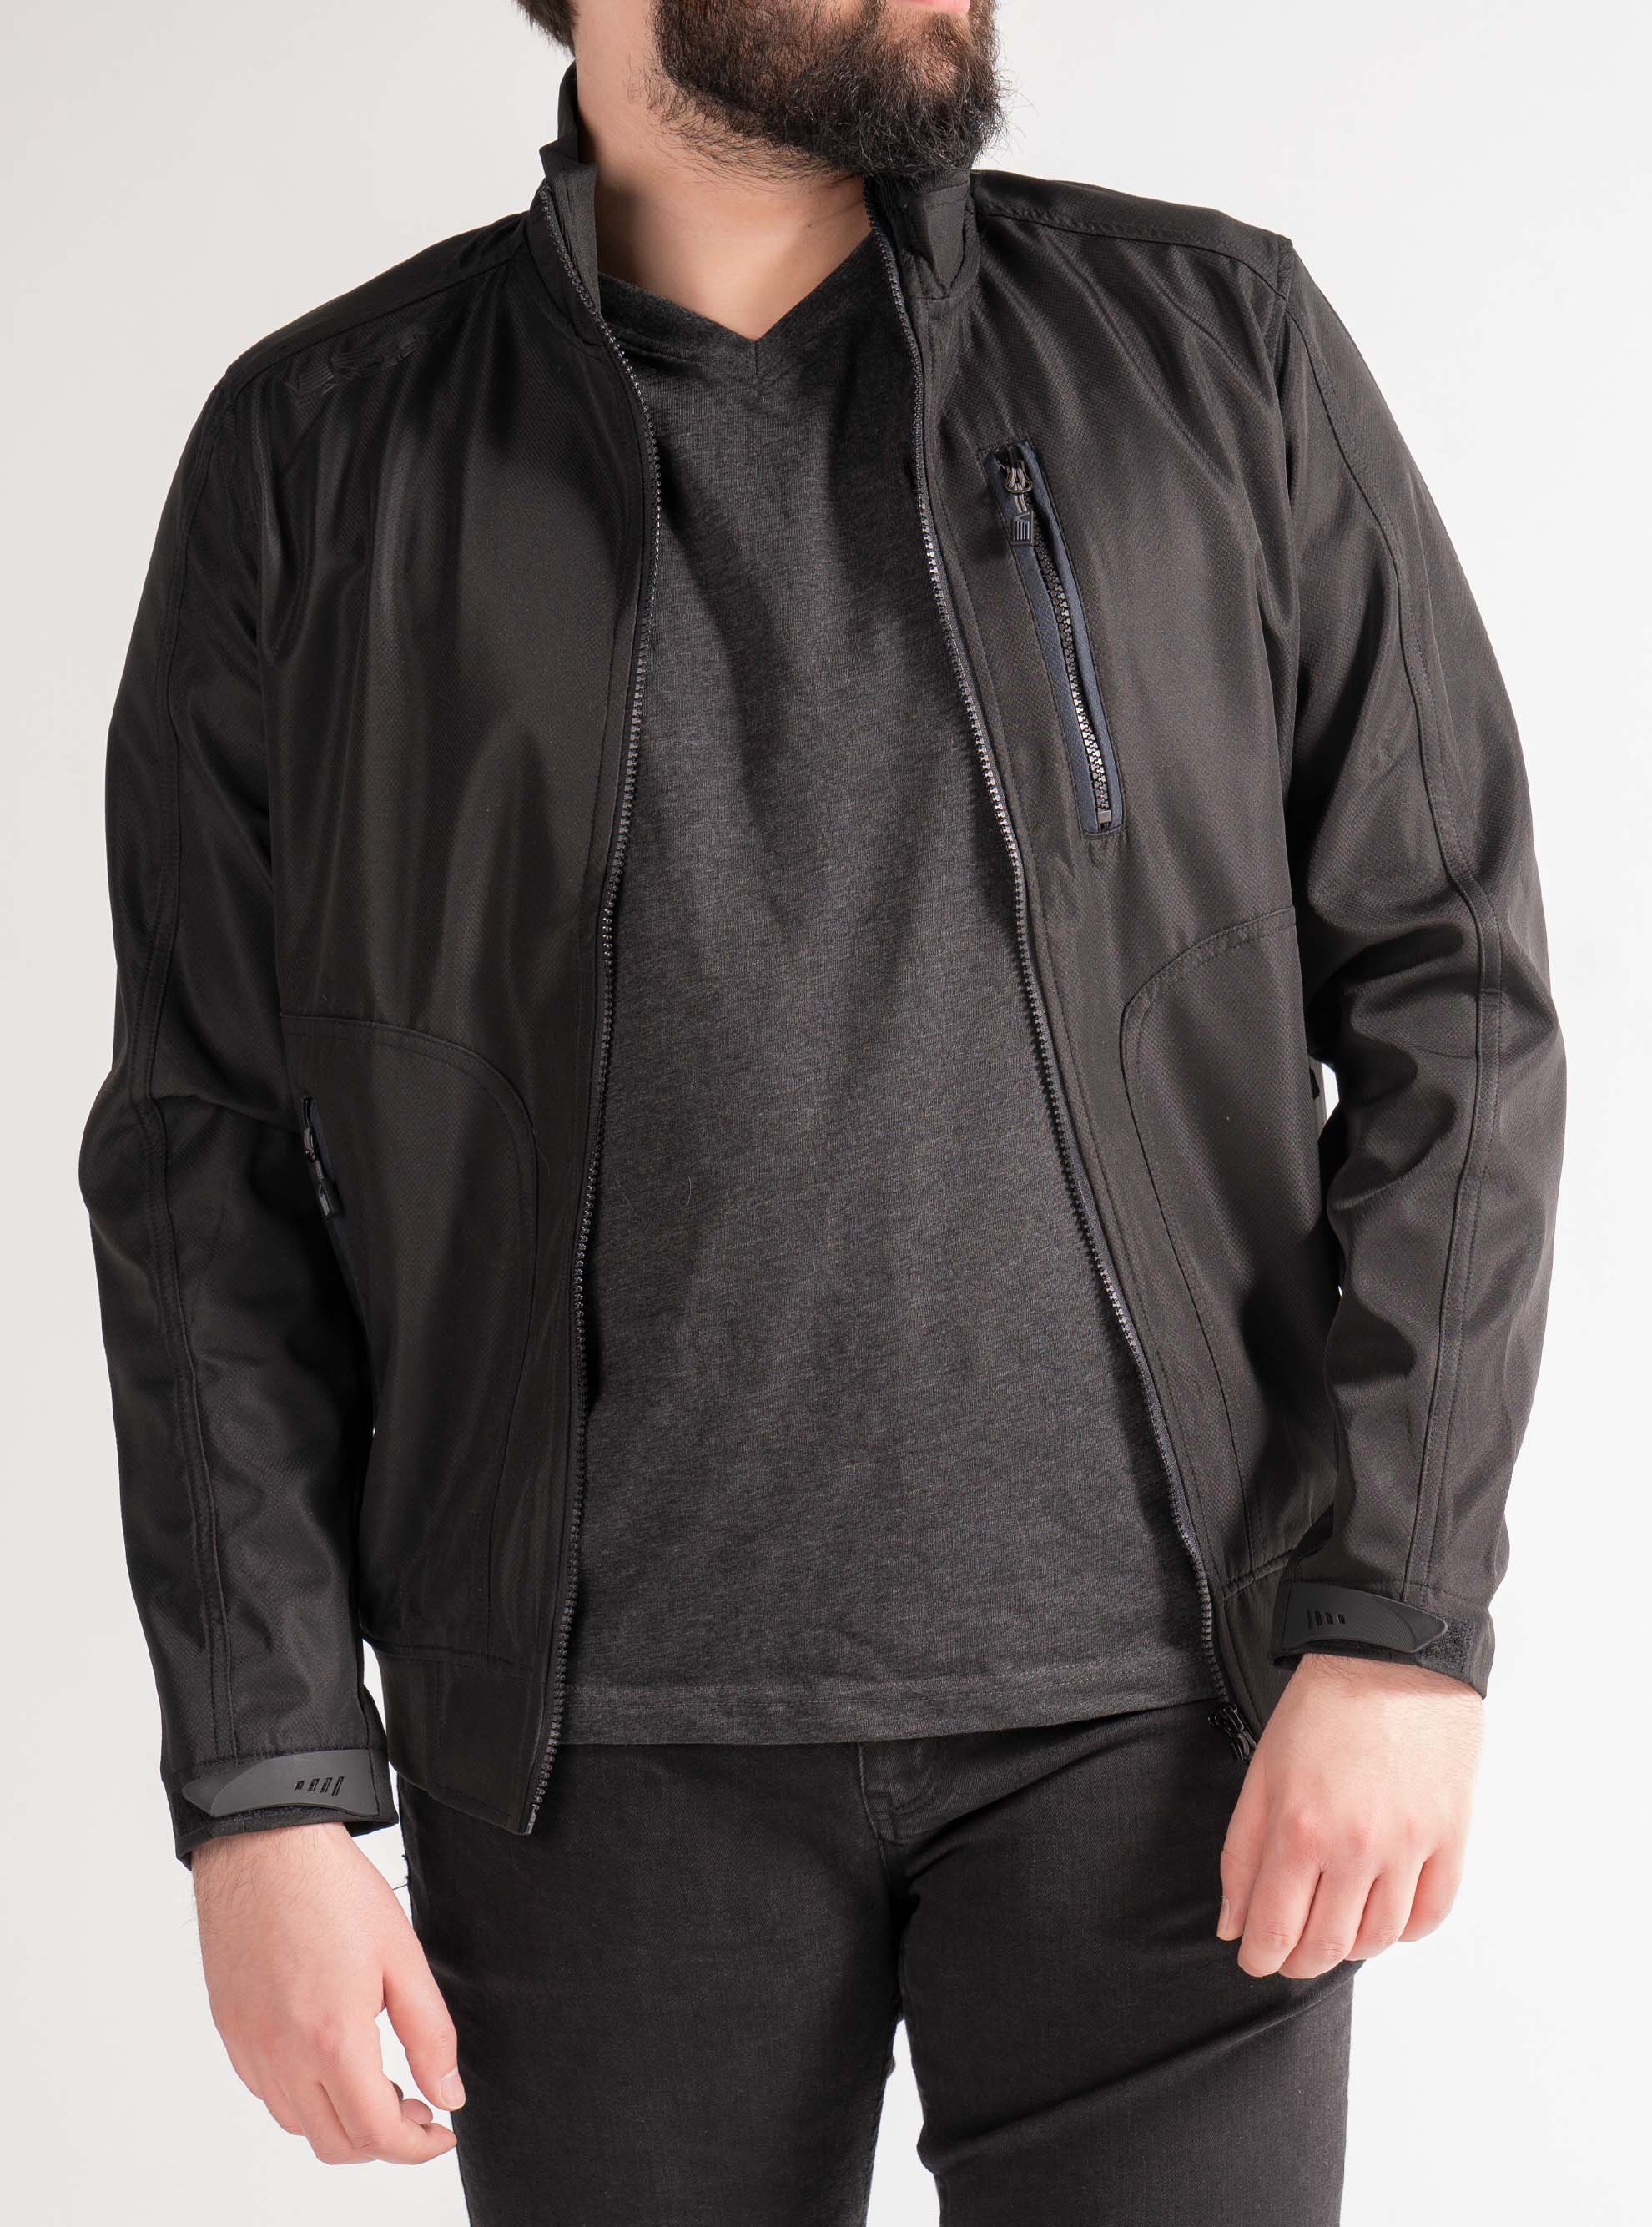 Solid Charcoal Transition Coat